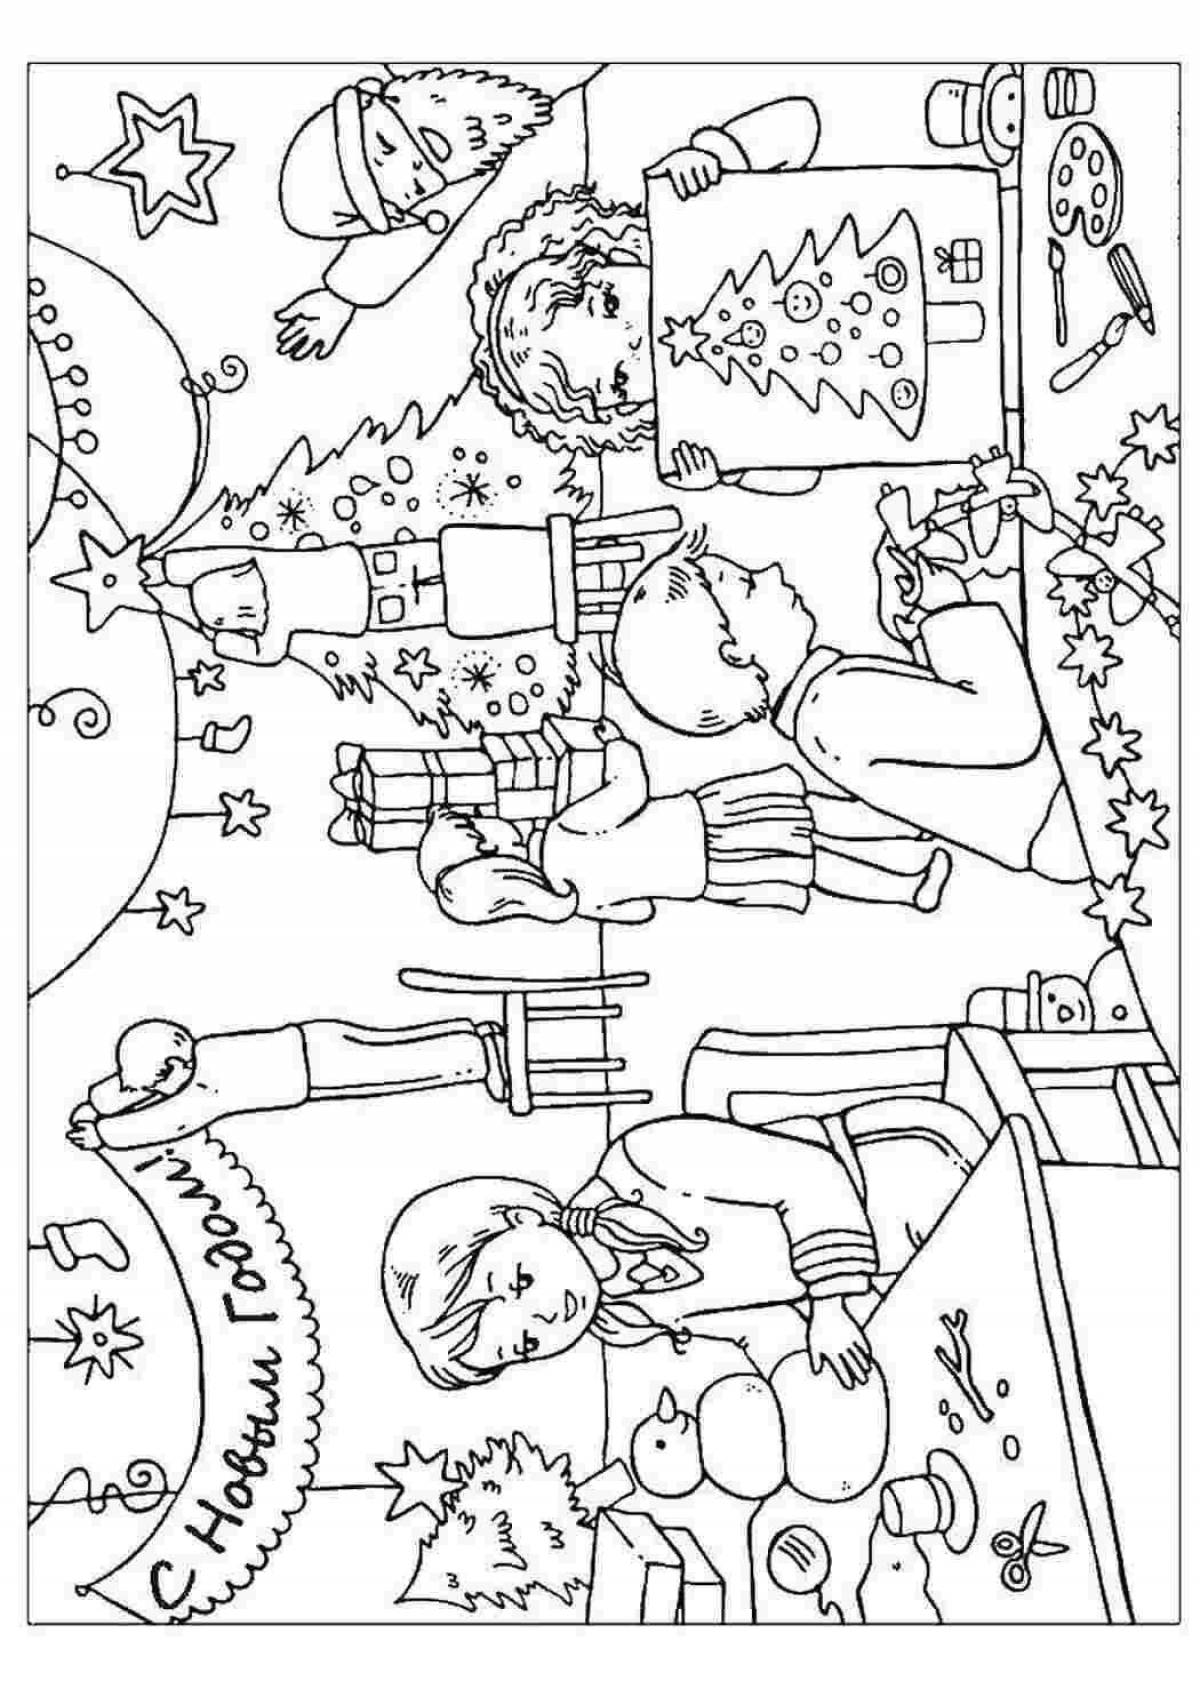 Festive Christmas family coloring book